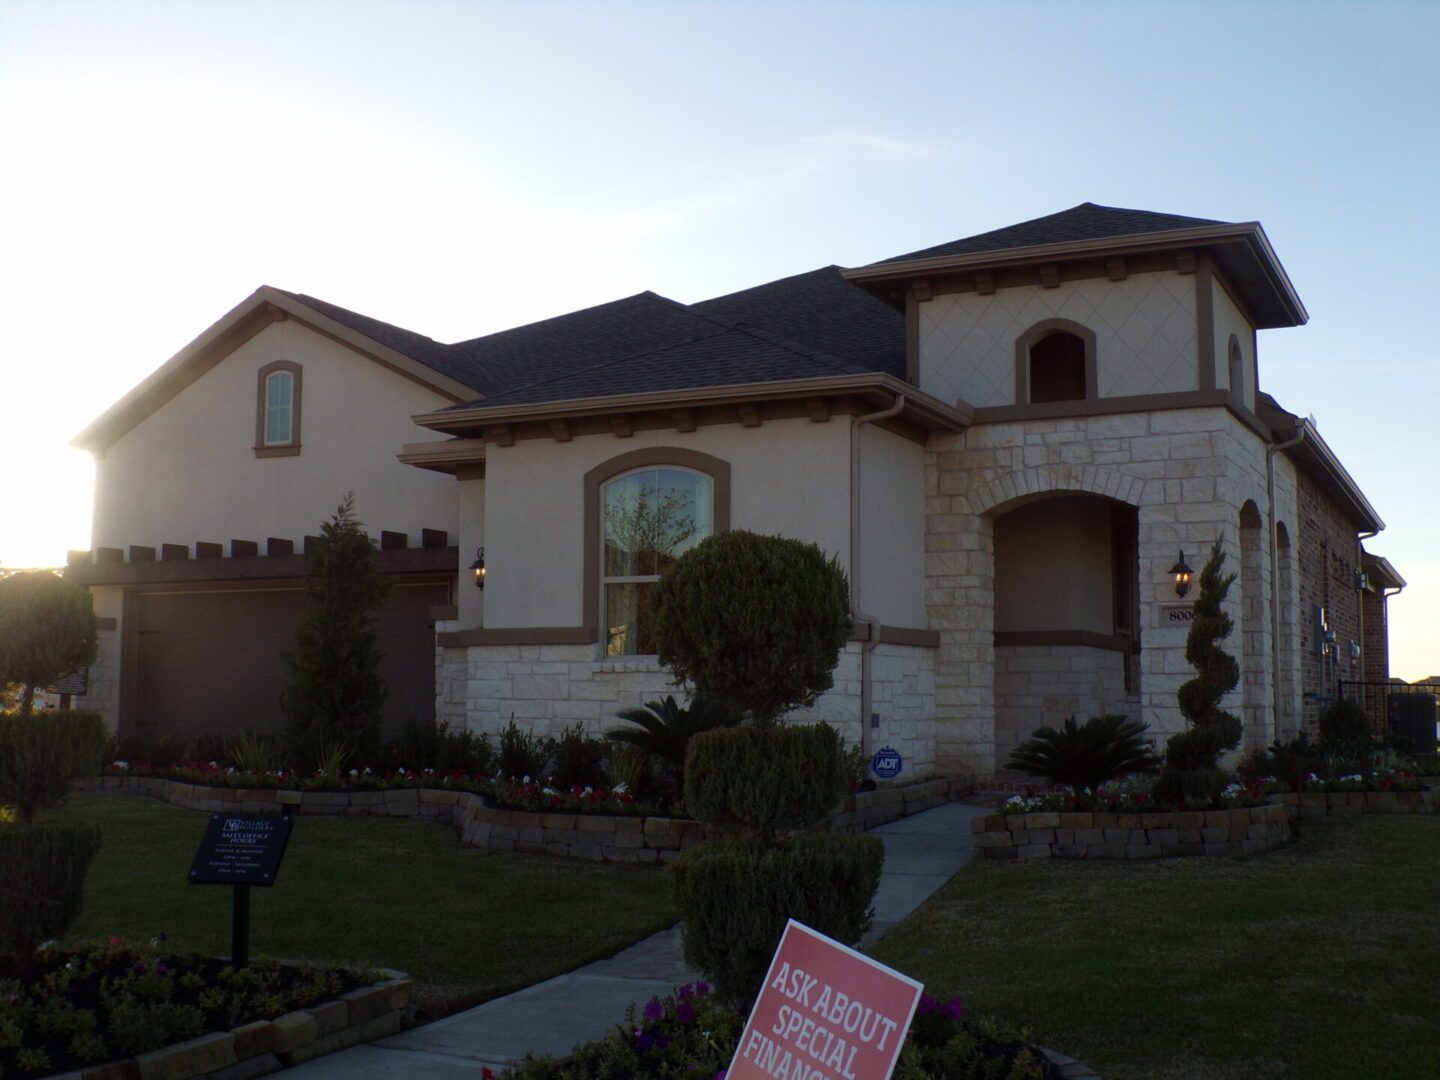 A two-story suburban home with a stone facade and a two-car garage, constructed by Texas builders, surrounded by a manicured lawn and promotional real estate signs.